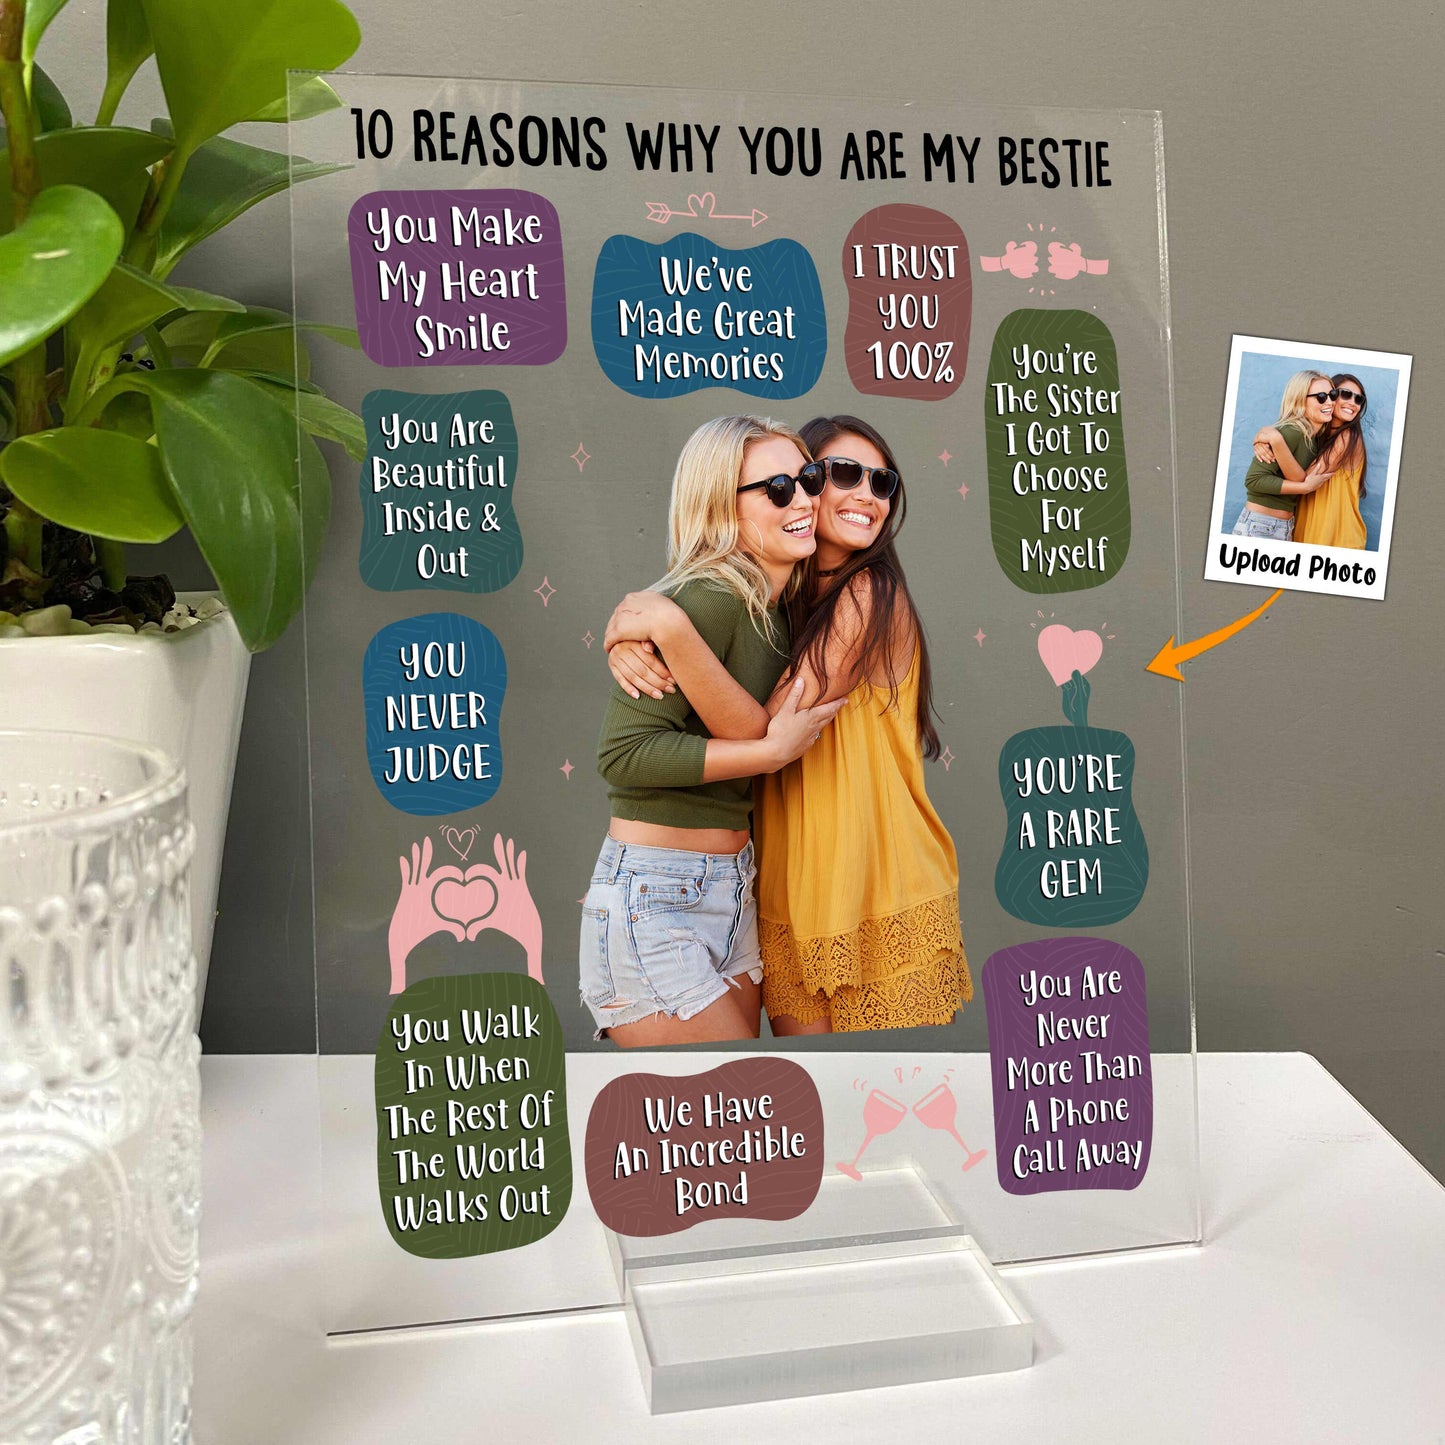 10 Reasons Why You Are My Bestie - Personalized Acrylic Photo Plaque